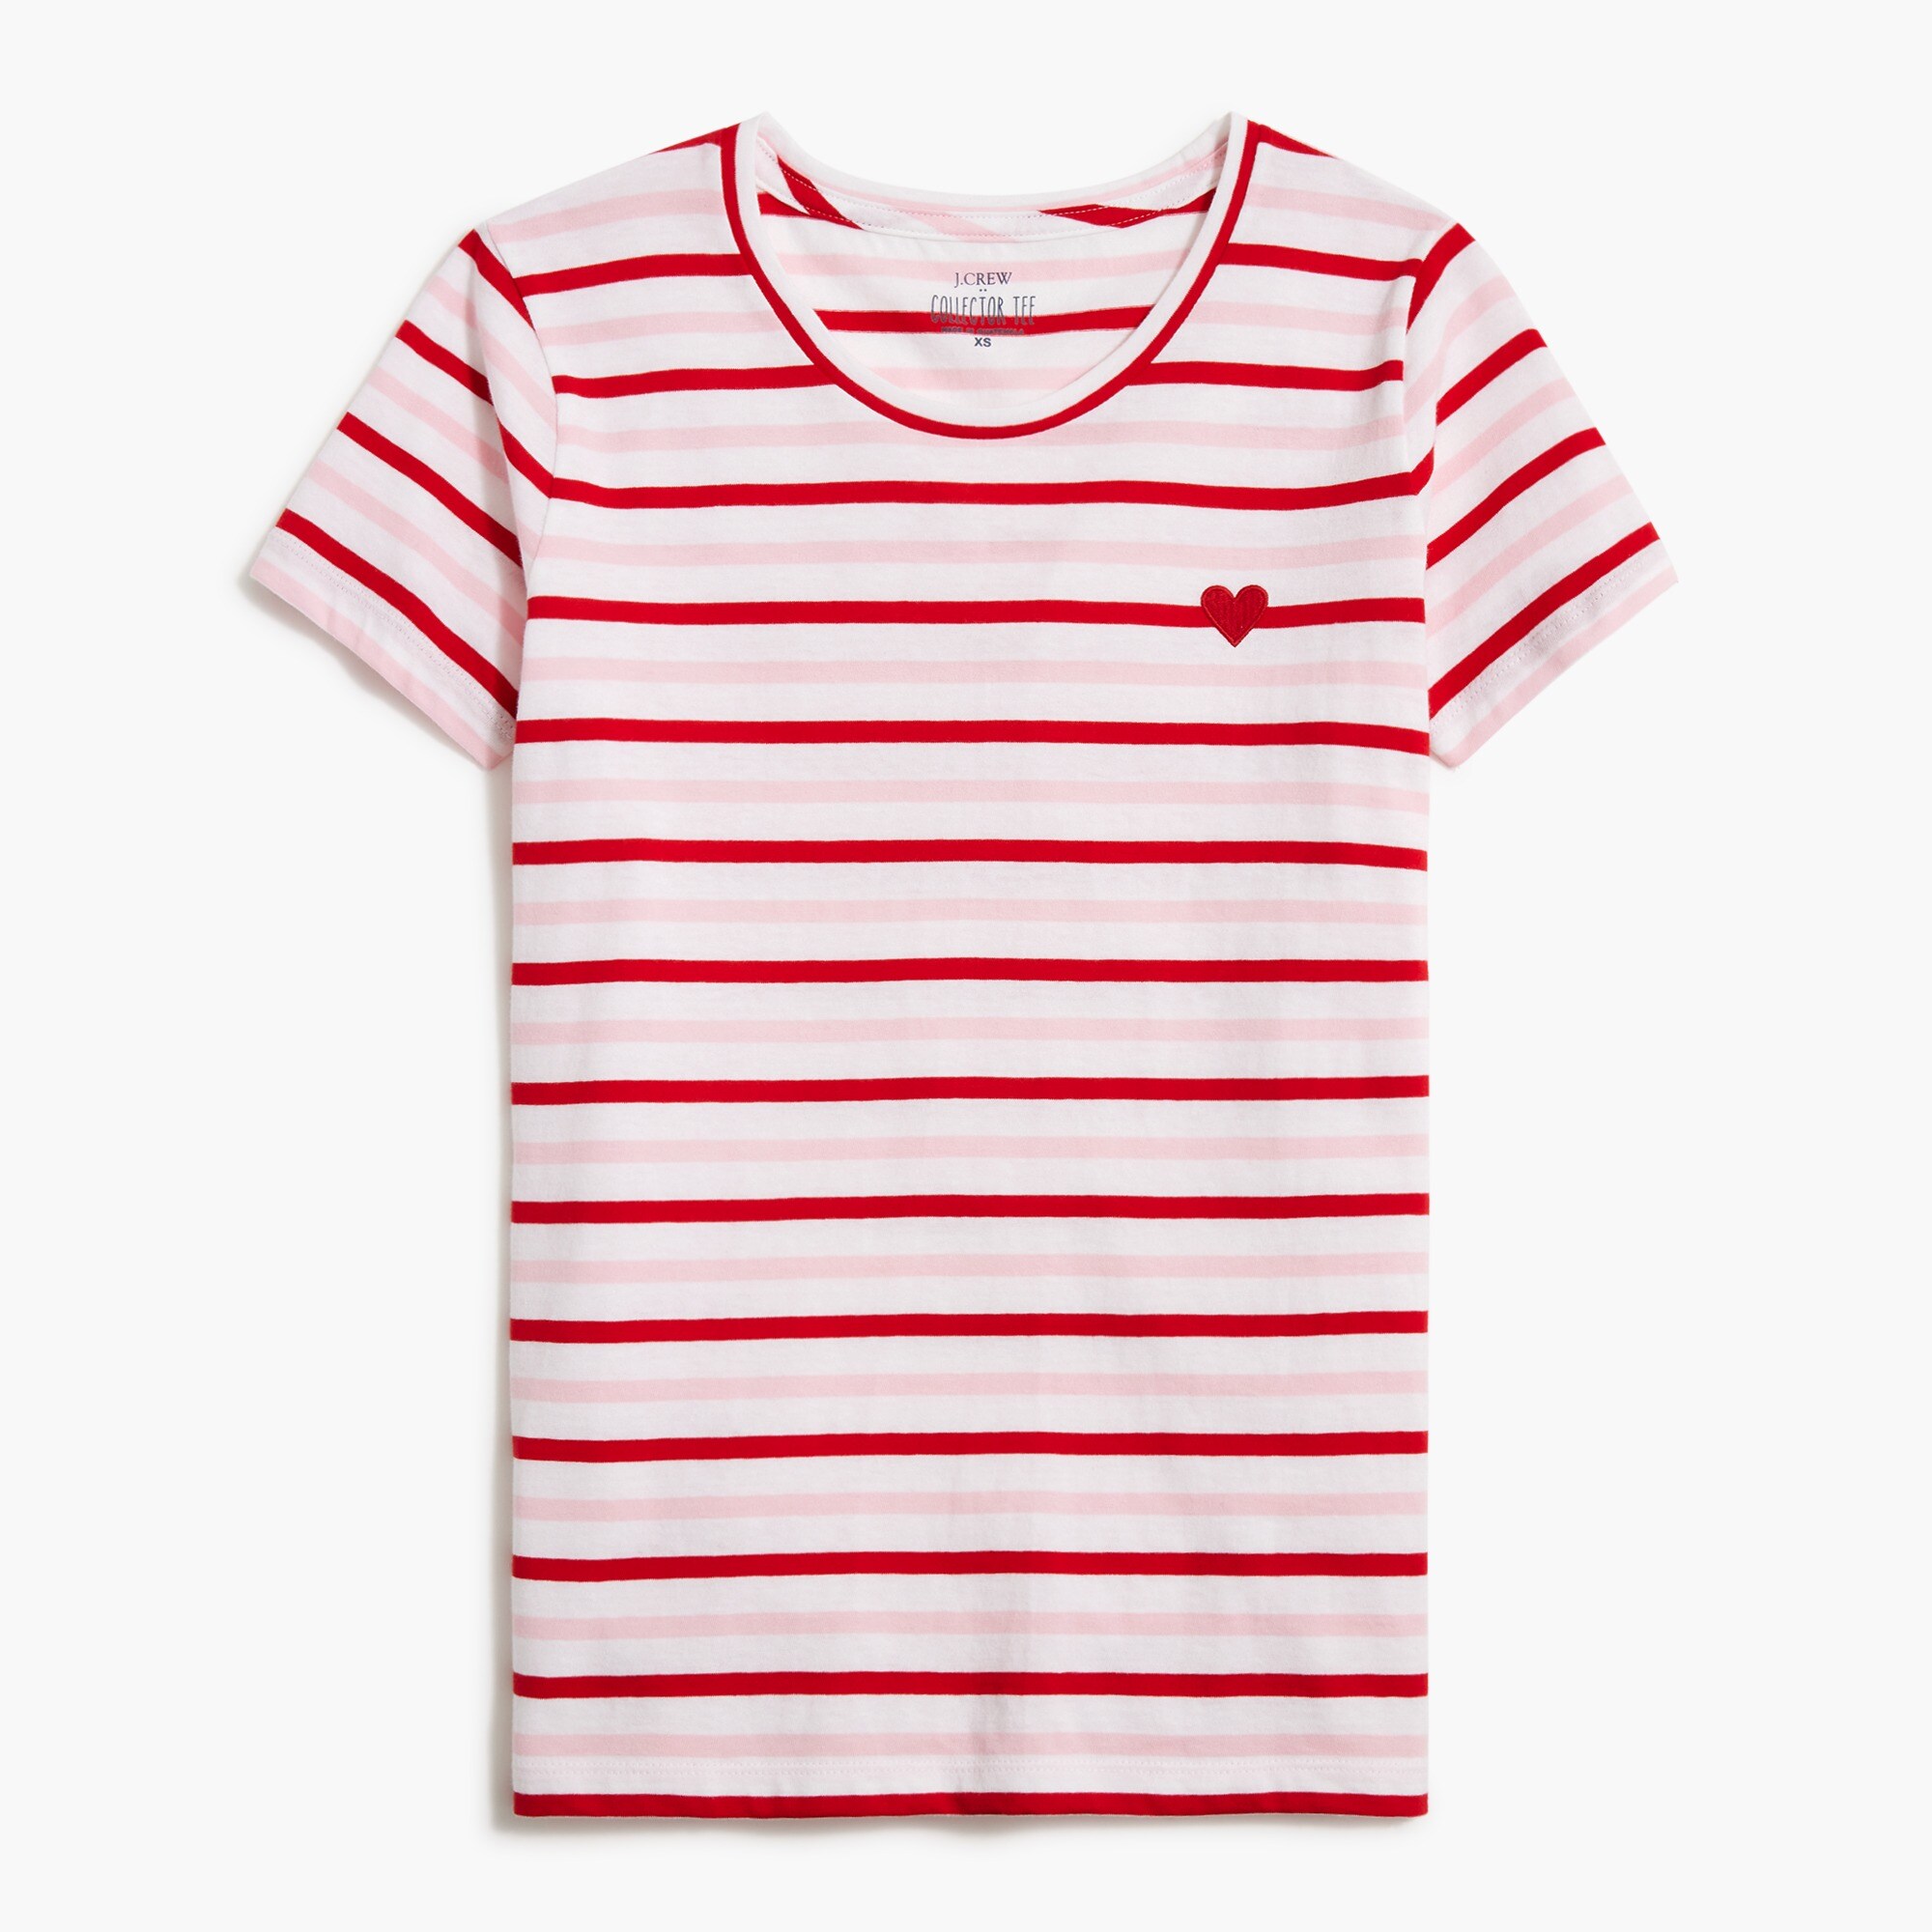  Striped hearts graphic tee